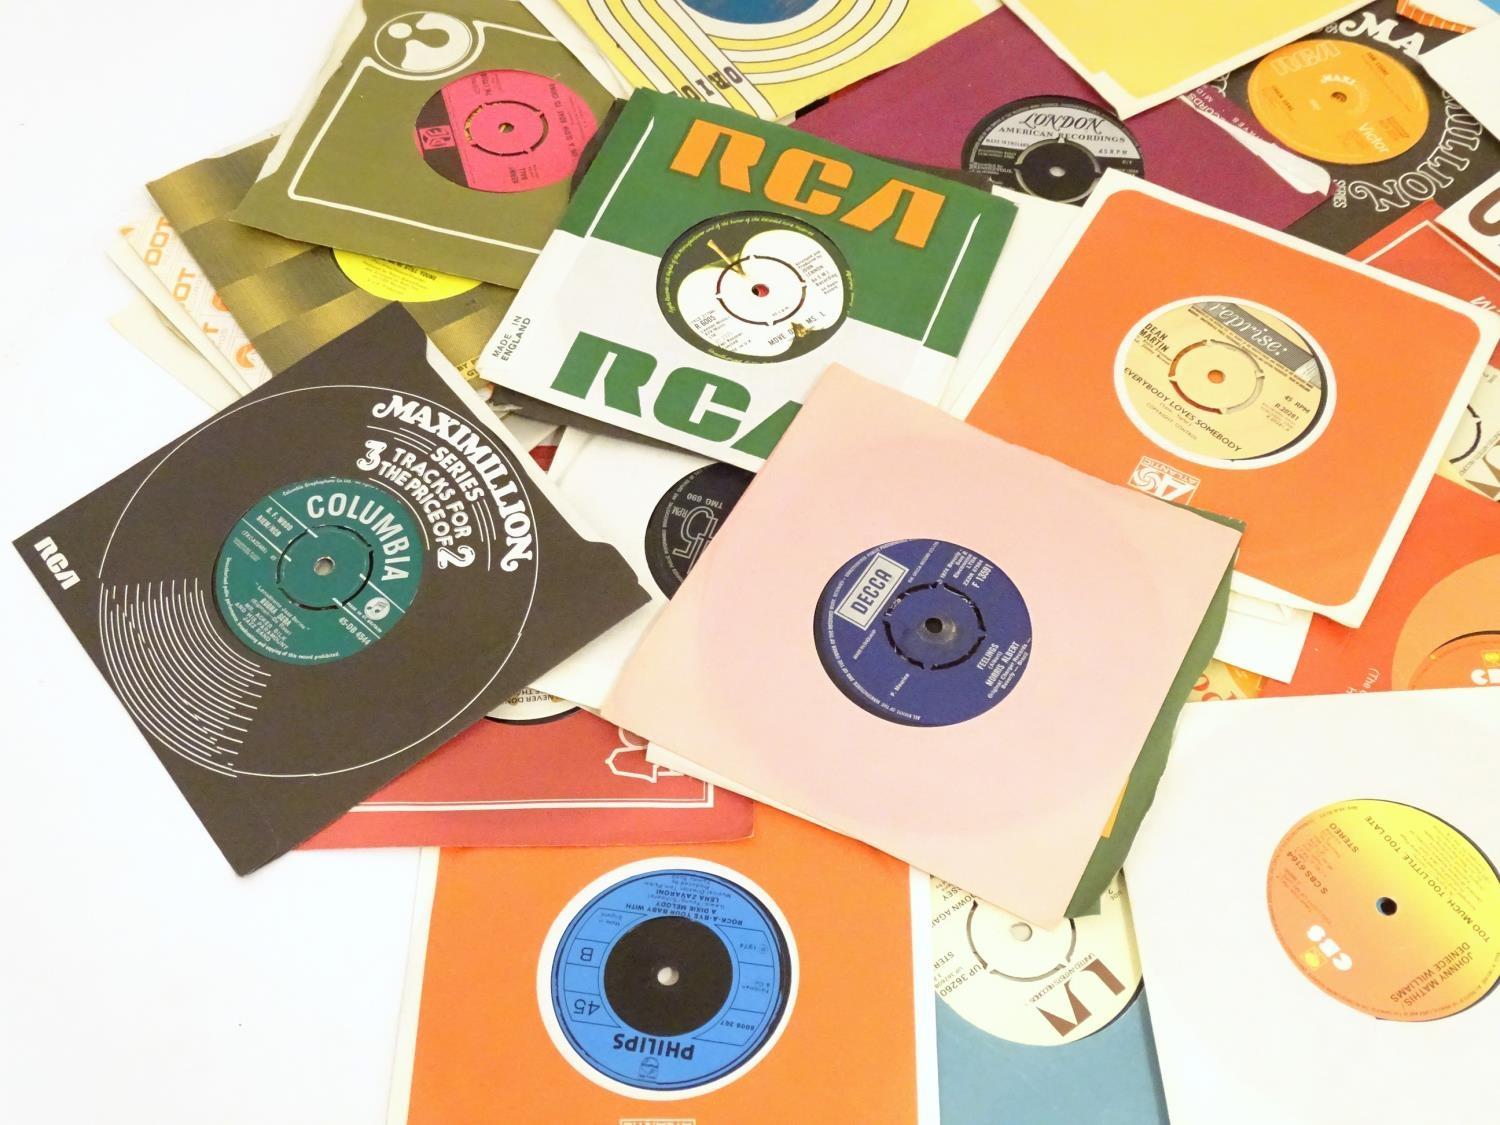 Records: a collection of 45rpm vinyl singles, to include examples by Sam Cooke, Stevie Wonder, - Image 5 of 8